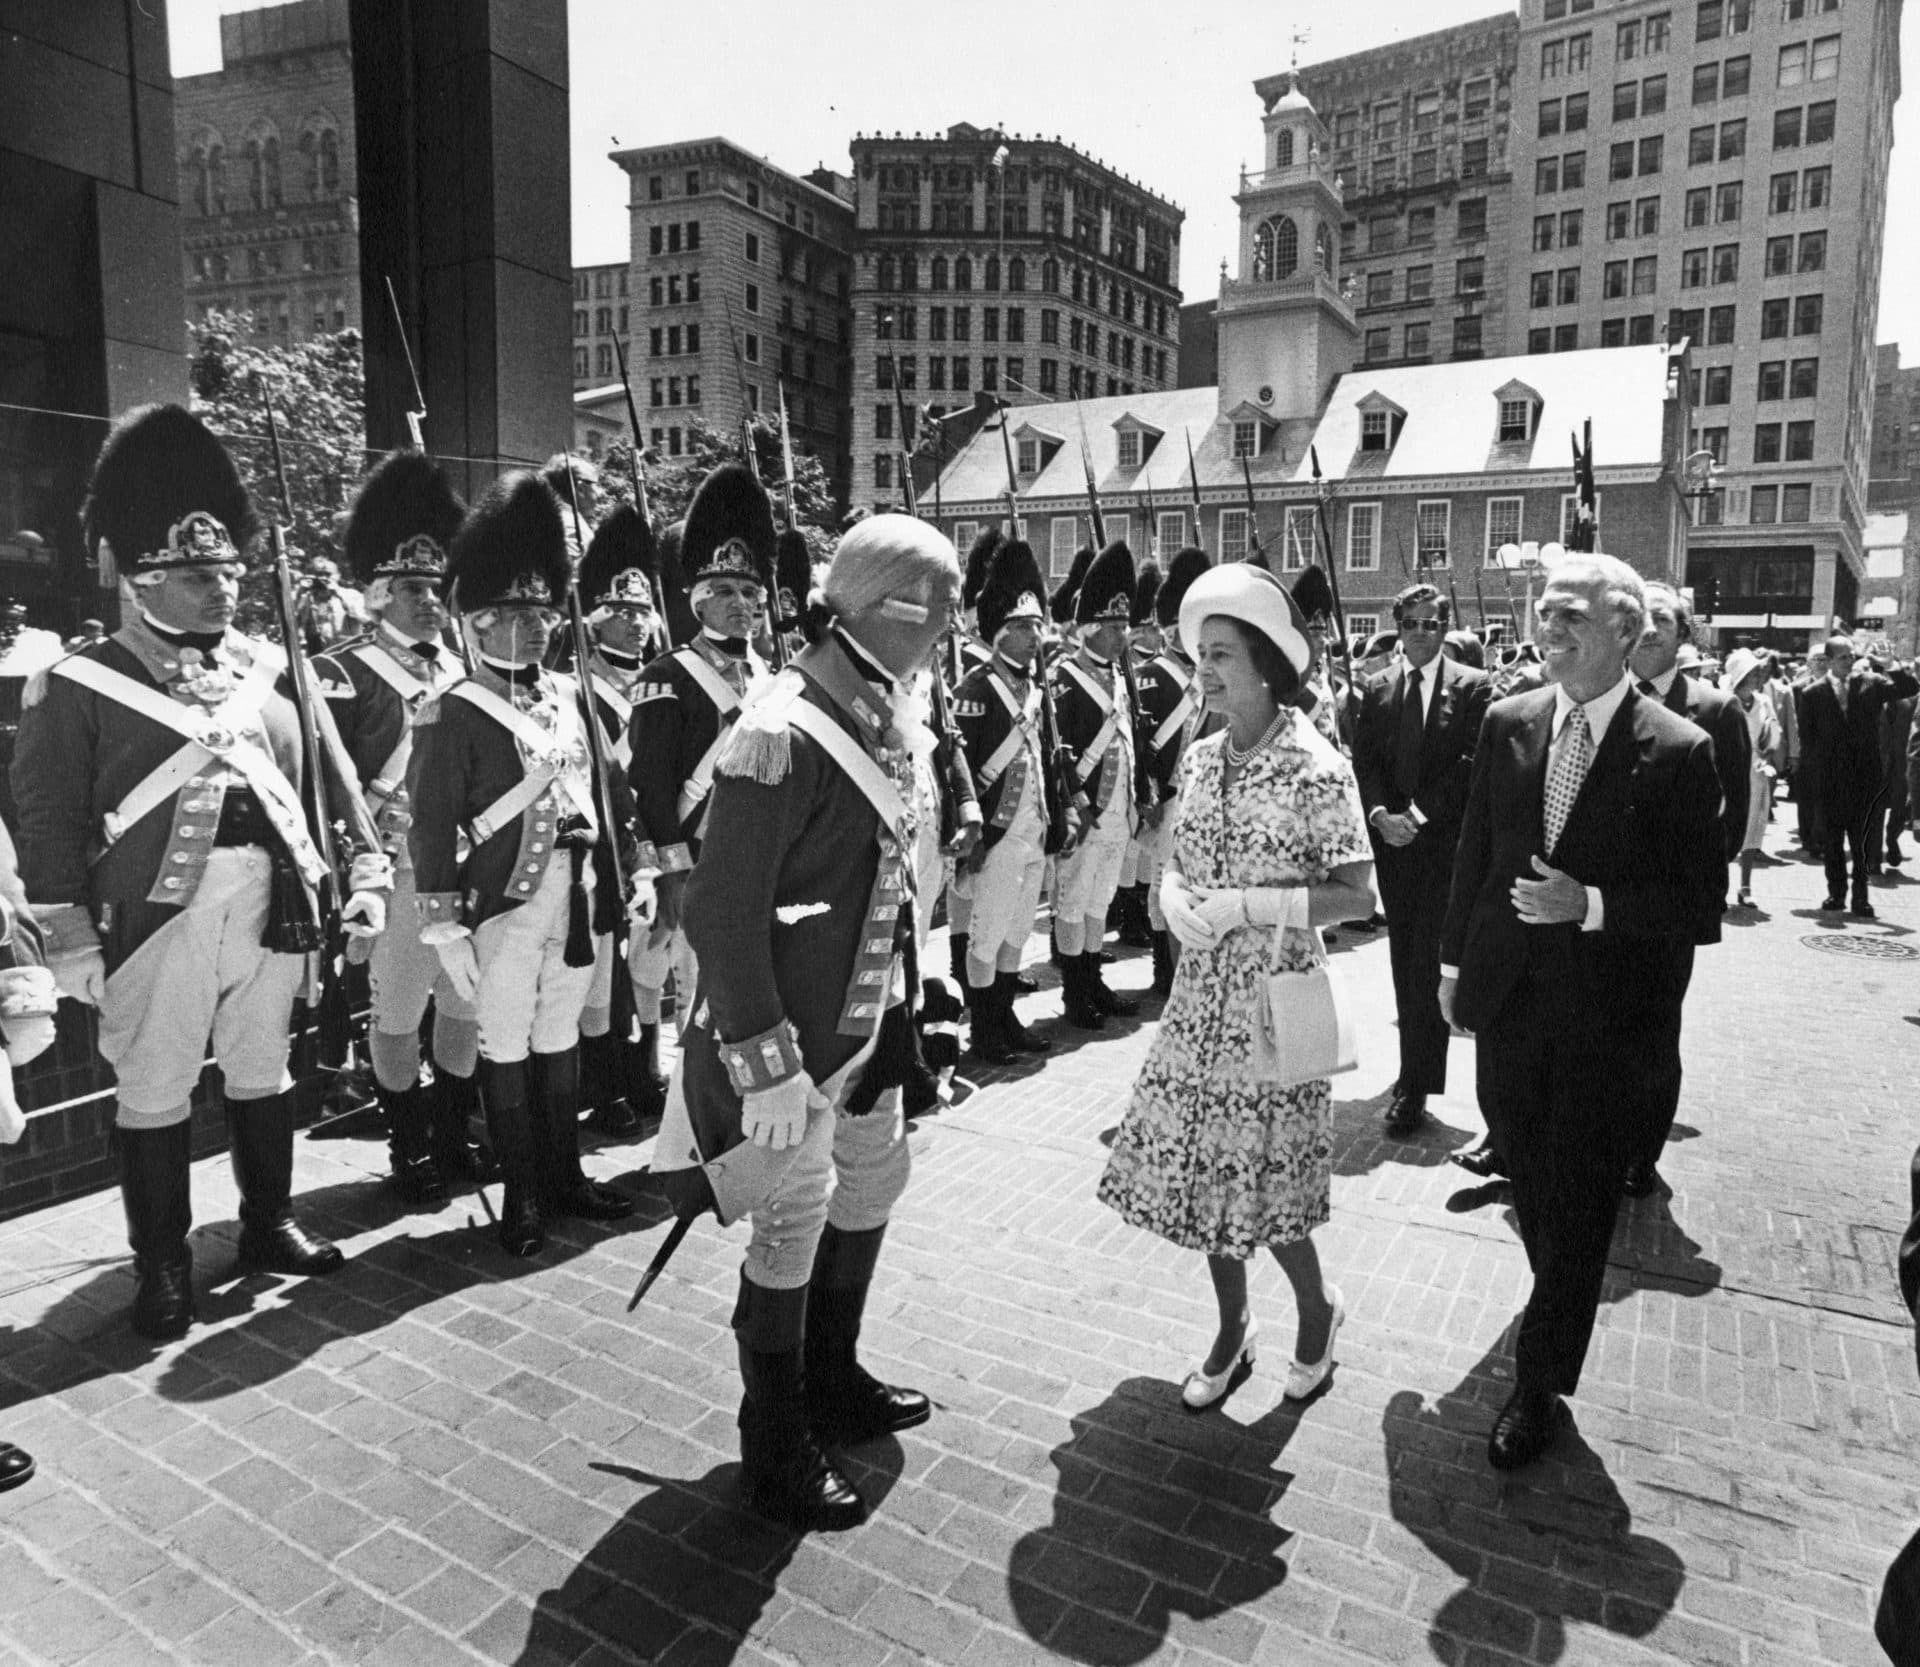 Mayor Kevin White escorts Queen Elizabeth II through Washington Mall in Boston on the way to City Hall ceremonies as Colonel Vincent J. R. Kehoe, left, and his 10th Regiment of Foot, Chelmsford, guard the way on July 11, 1976. (David L. Ryan/The Boston Globe via Getty Images)